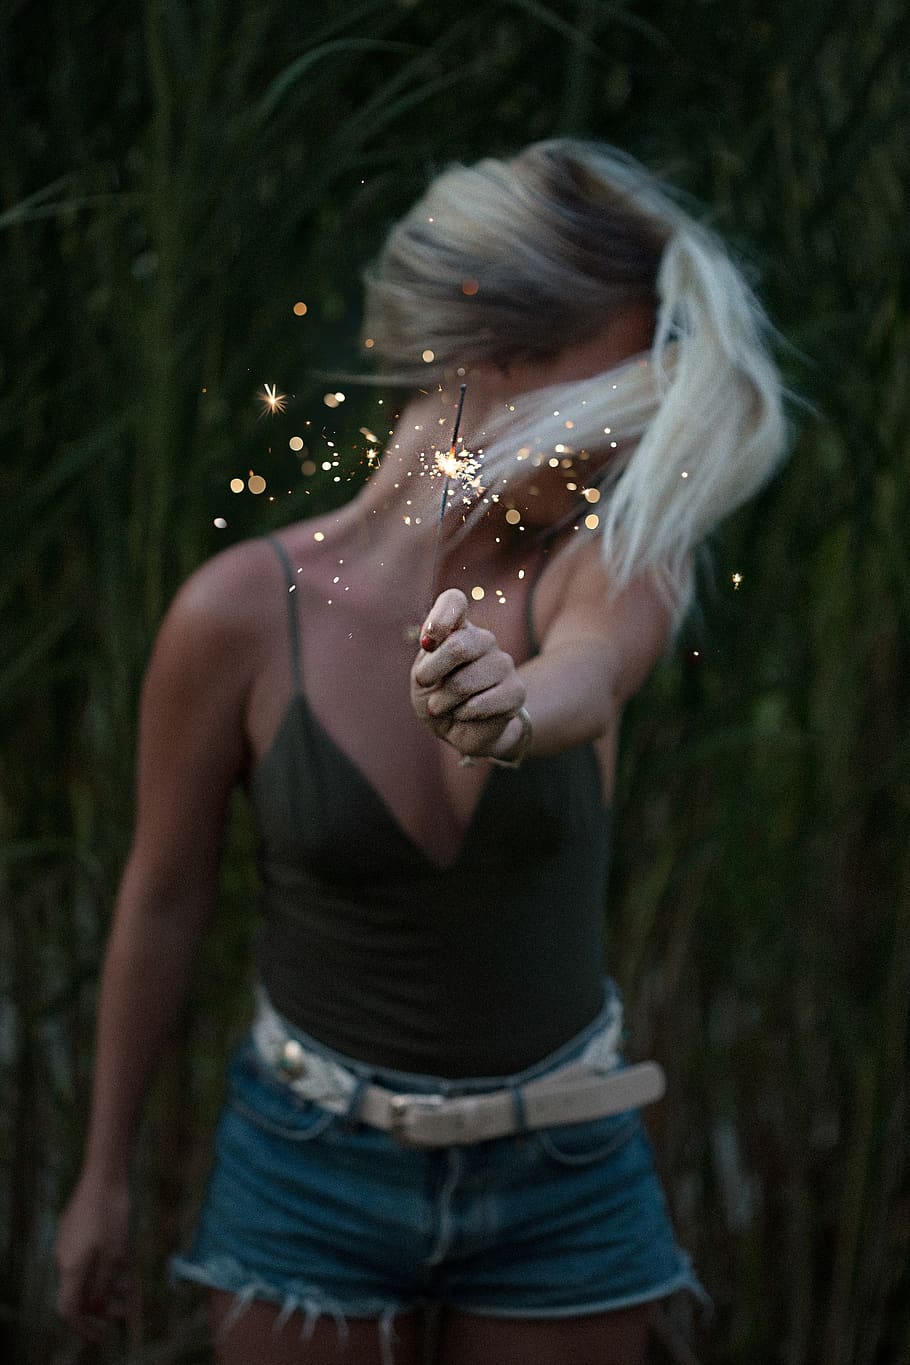 woman, girl, lady, people, stand, fashion, style, hold, sparklers, fireworks